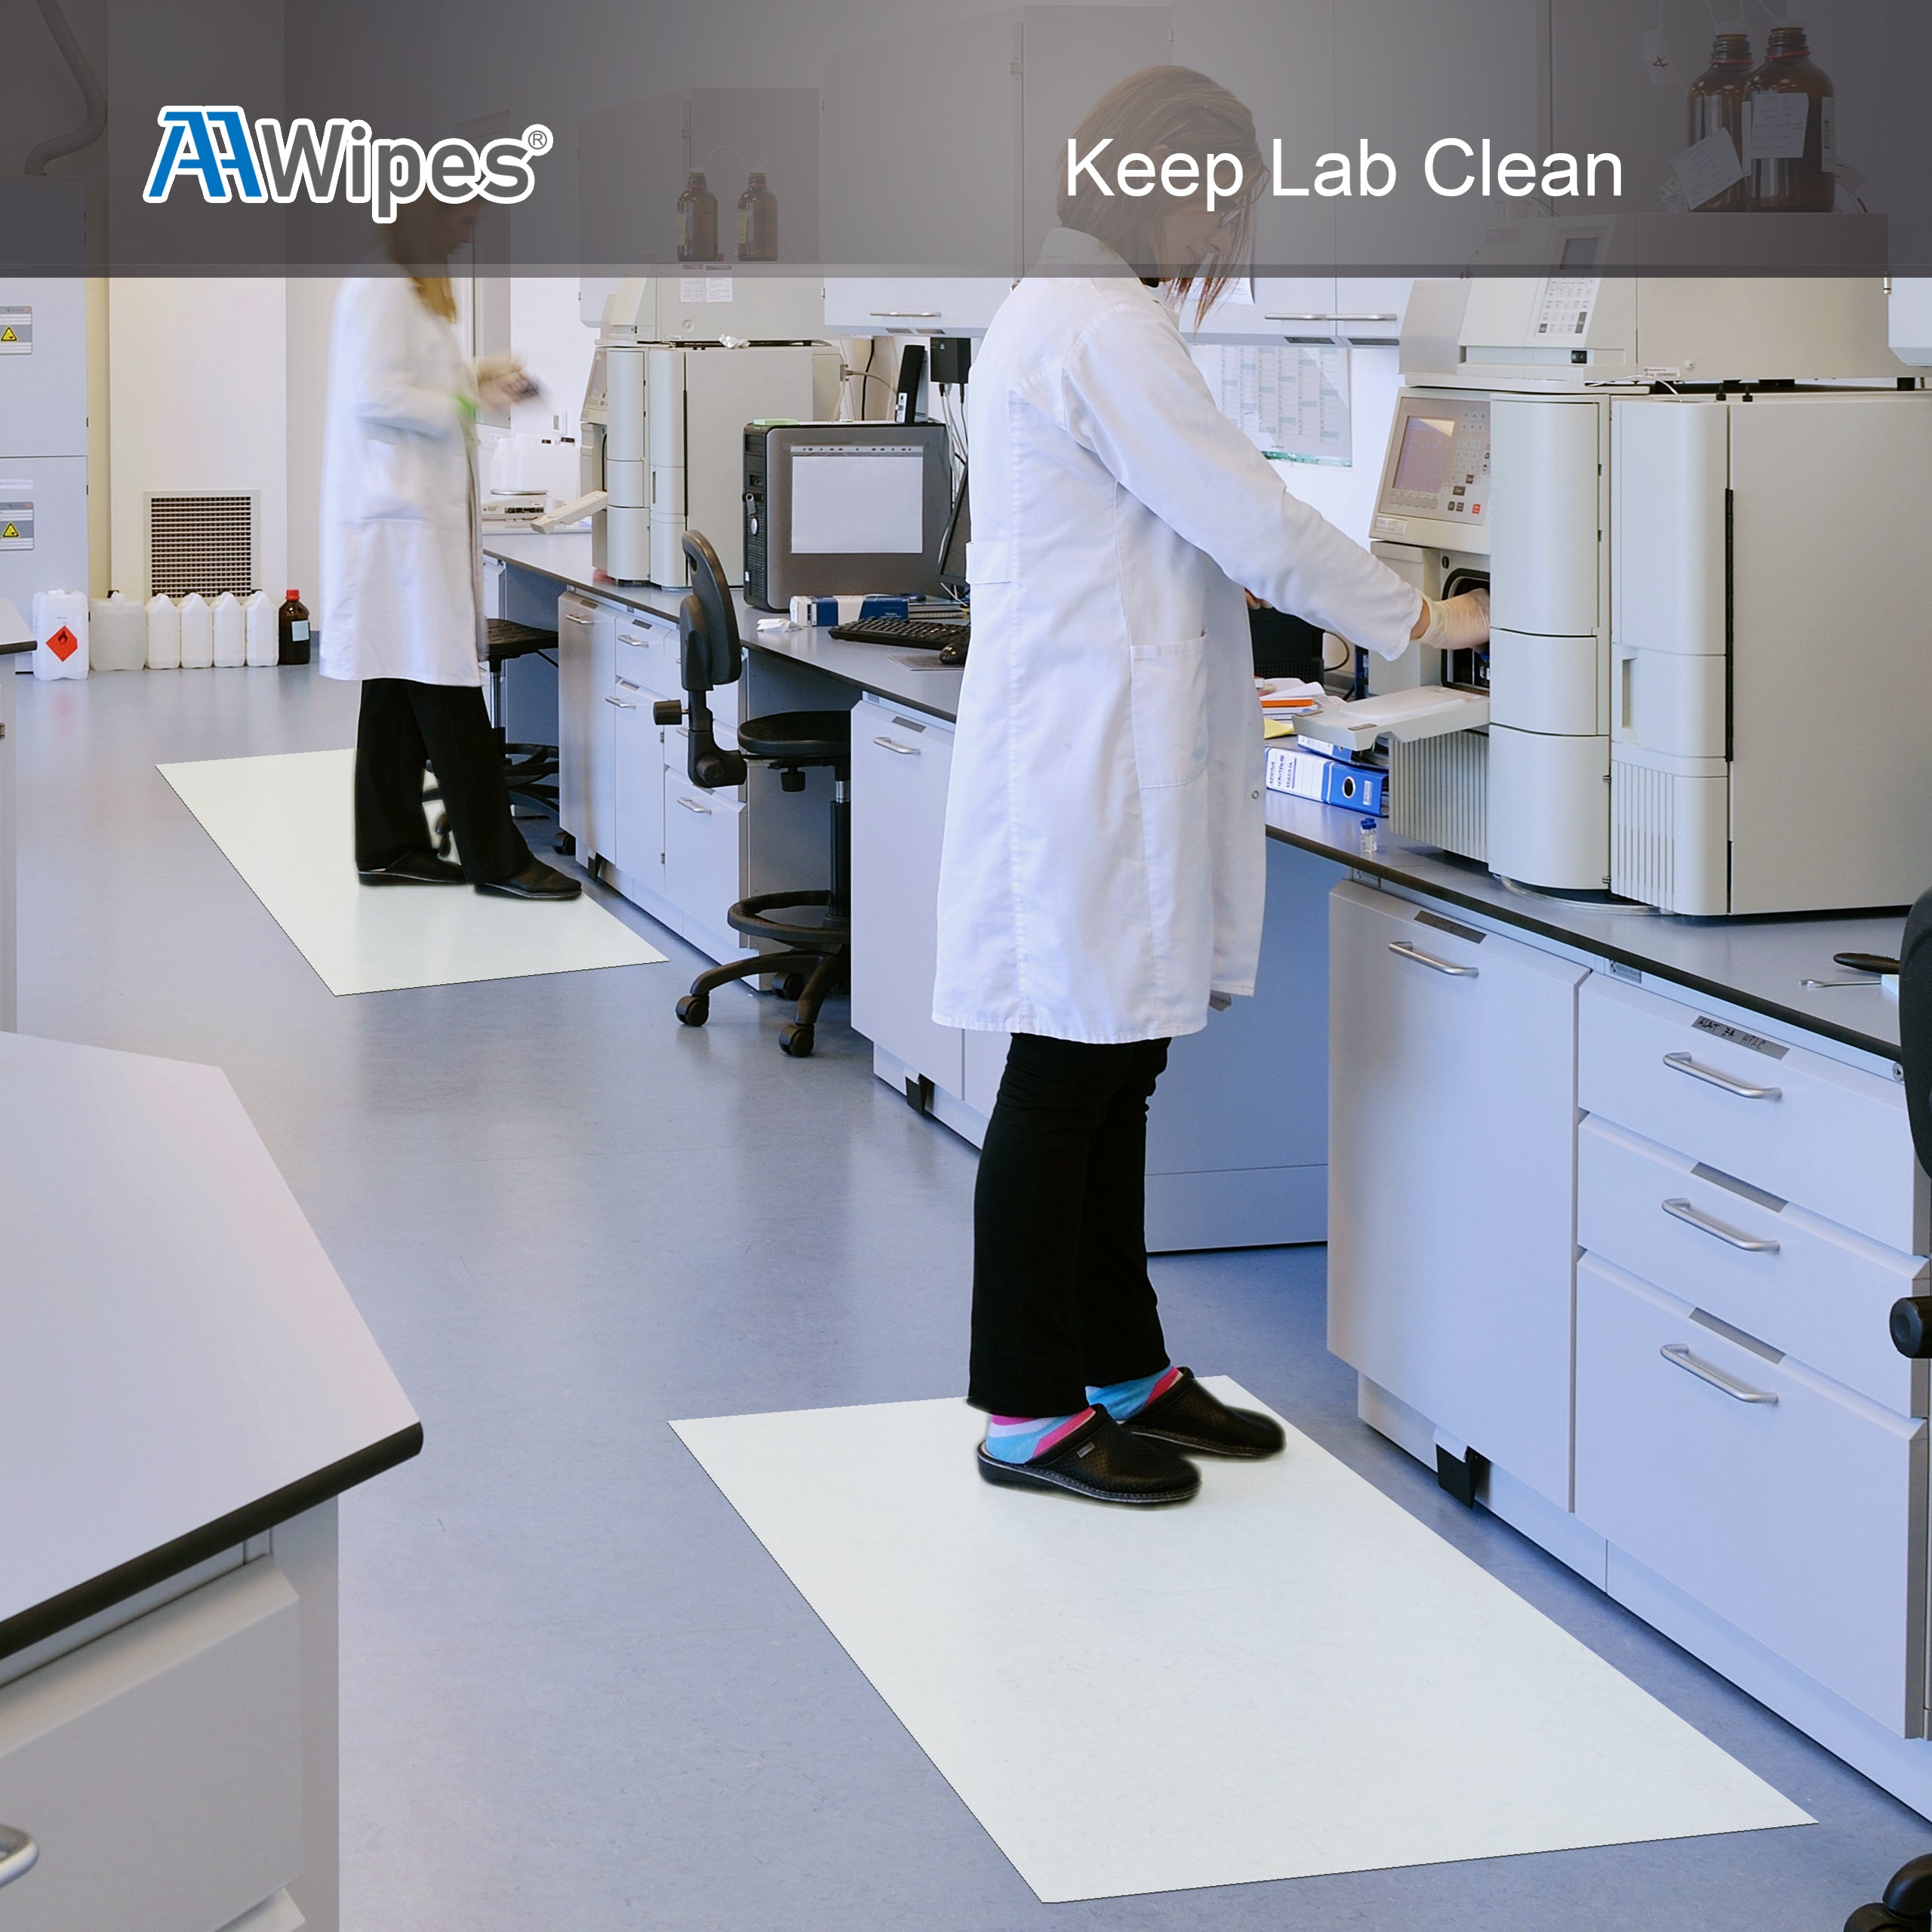 Cleanroom Sticky Floor Mats 18"X36" White for Microelectronics, Aerospace, Hospital, Lab, Biotechnology, Automotive, Construction, Health Care, Manufacturing, Semiconductor (6,000 Sheets/200 Mats/20 Boxs/Case) (No. IPSM-1836-300-W)